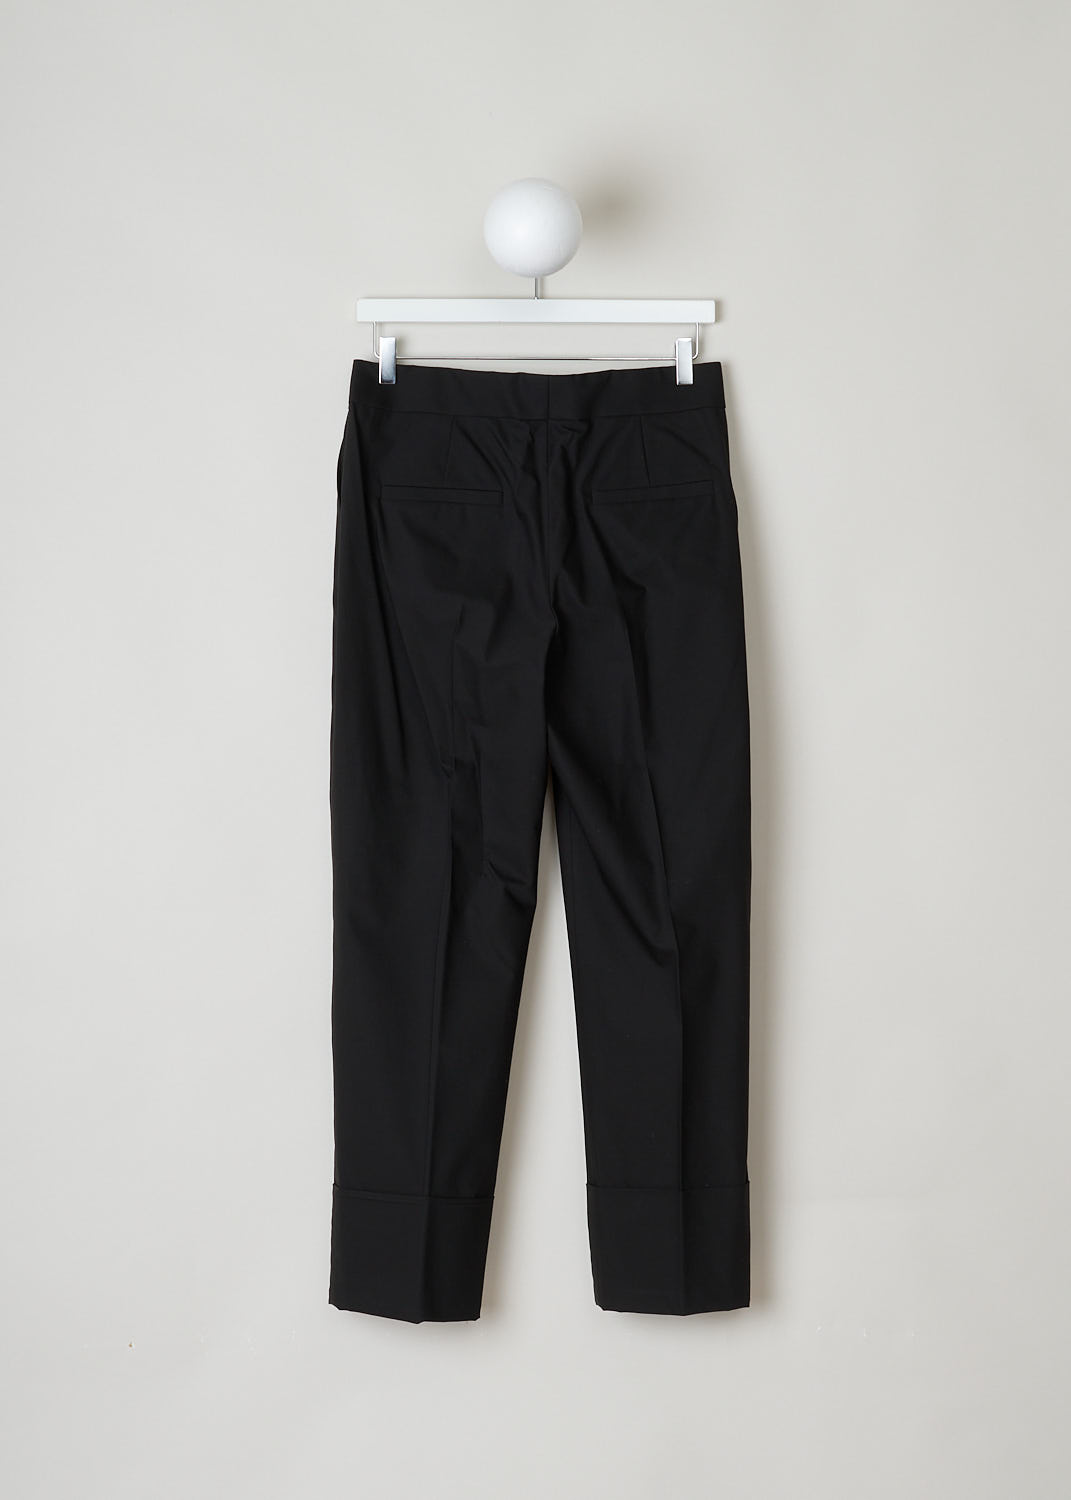 BRUNELLO CUCINELLI, BLACK PANTS WITH BEADED CLASP DETAIL, M0F70P70_C101, Black, Back, This beautiful black pants comes with an elastic waistband. It has a concealed zipper and clasp, adorned with a subtle beaded detail. The pants has two side slit pockets and two welt pockets on the back. Furthermore, the hem is finished with a broad fold-over.